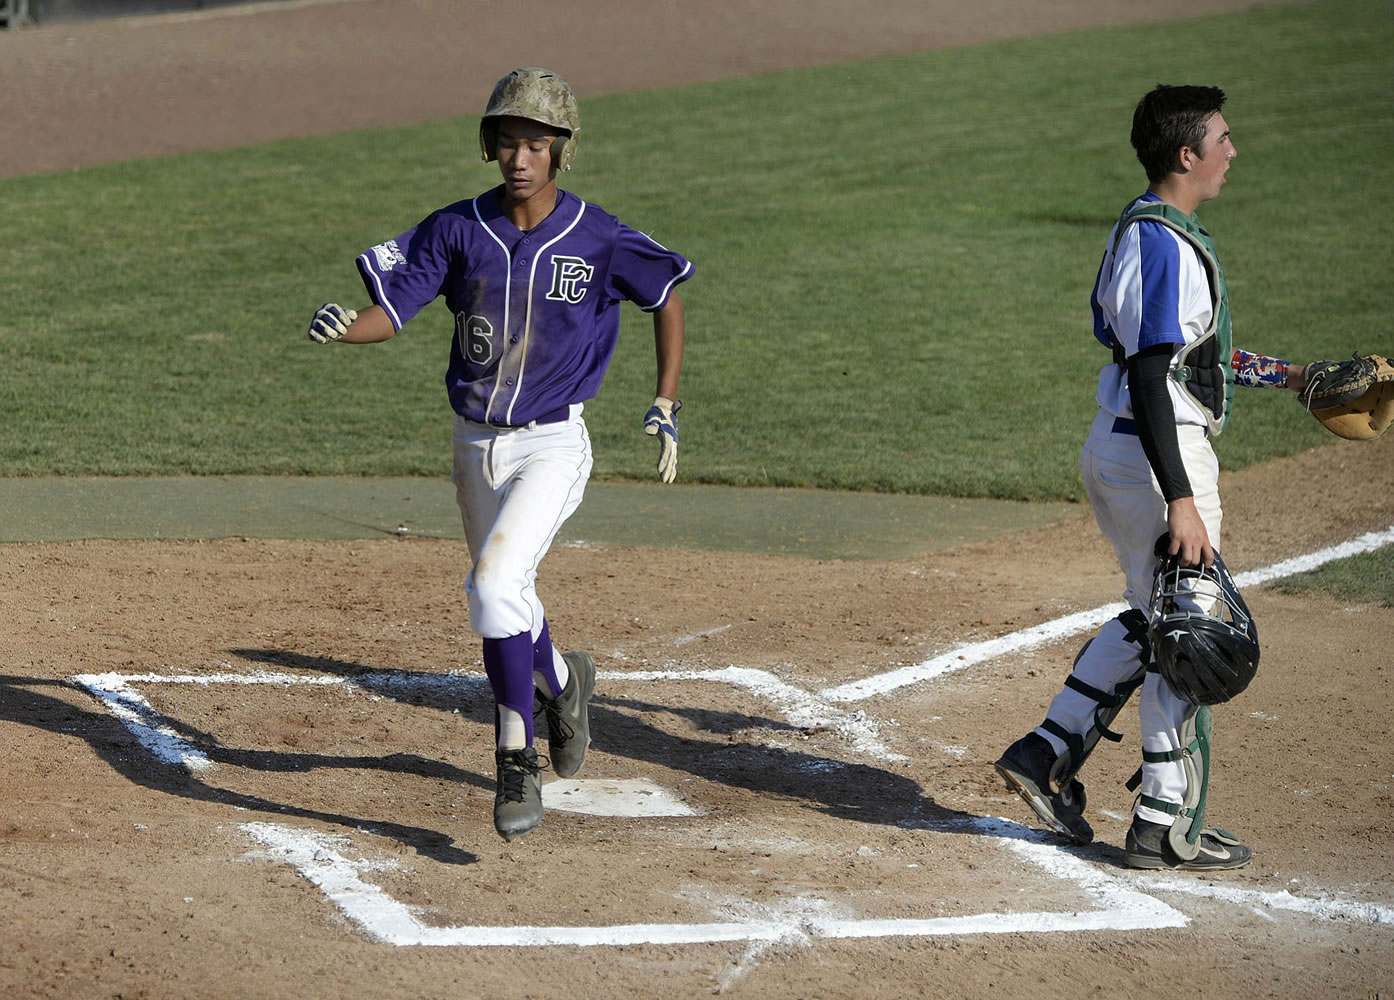 Pearl City's Rayson Carriaga, left, strides past Manhattan Beach catcher Jake Gordon to score in the first inning Wednesday evening, August 12, 2015 at Propstra Stadium.